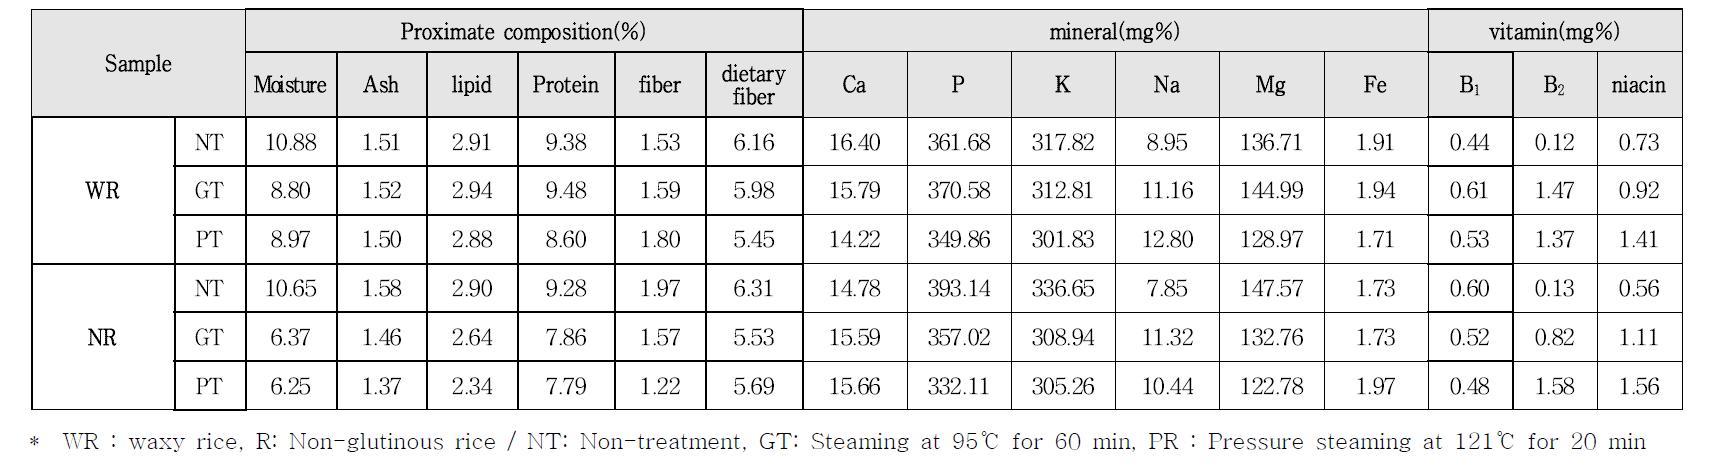 Effect of steaming on proximate composition, mineral and vitamin contents of rice for preparation of Olbyeossal from rough rice